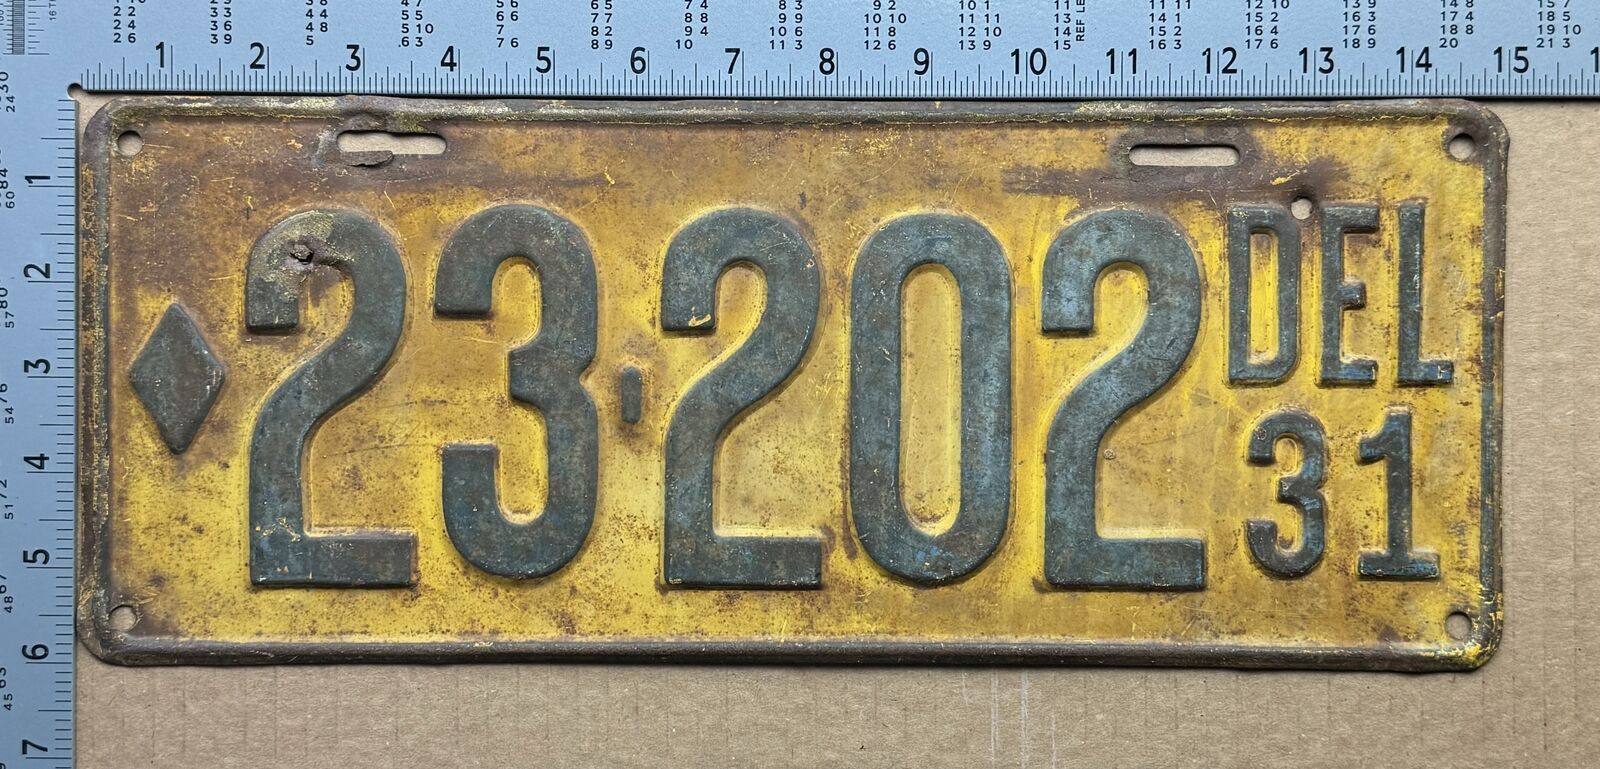 1931 Delaware license plate 23202 Ford Chevy Dodge 15890